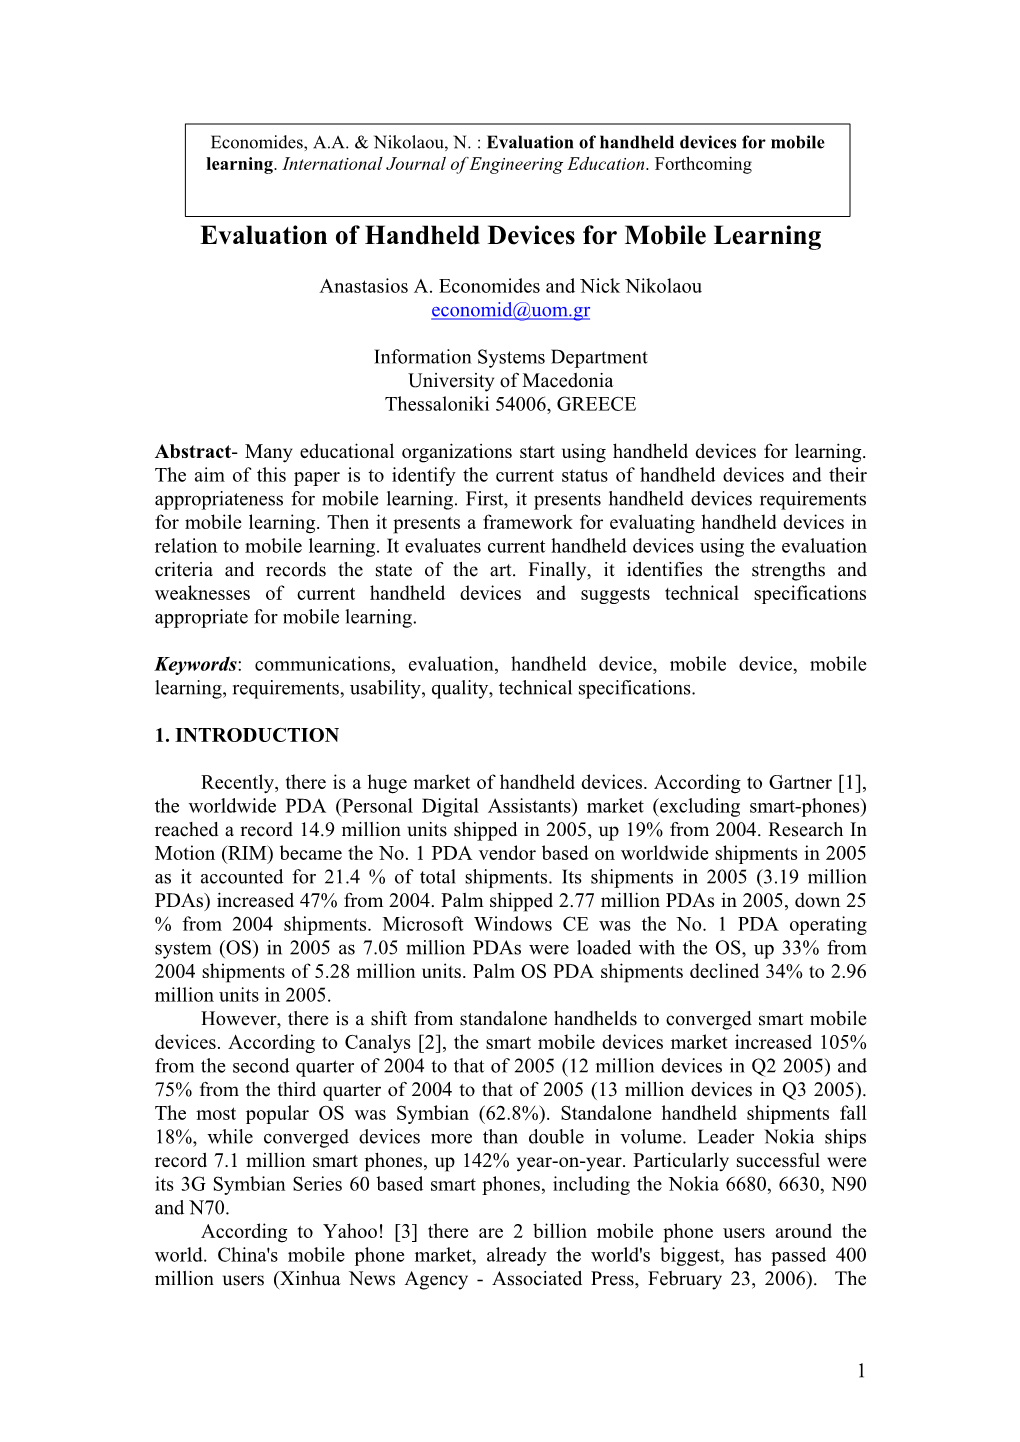 Evaluation of Handheld Devices for Mobile Learning